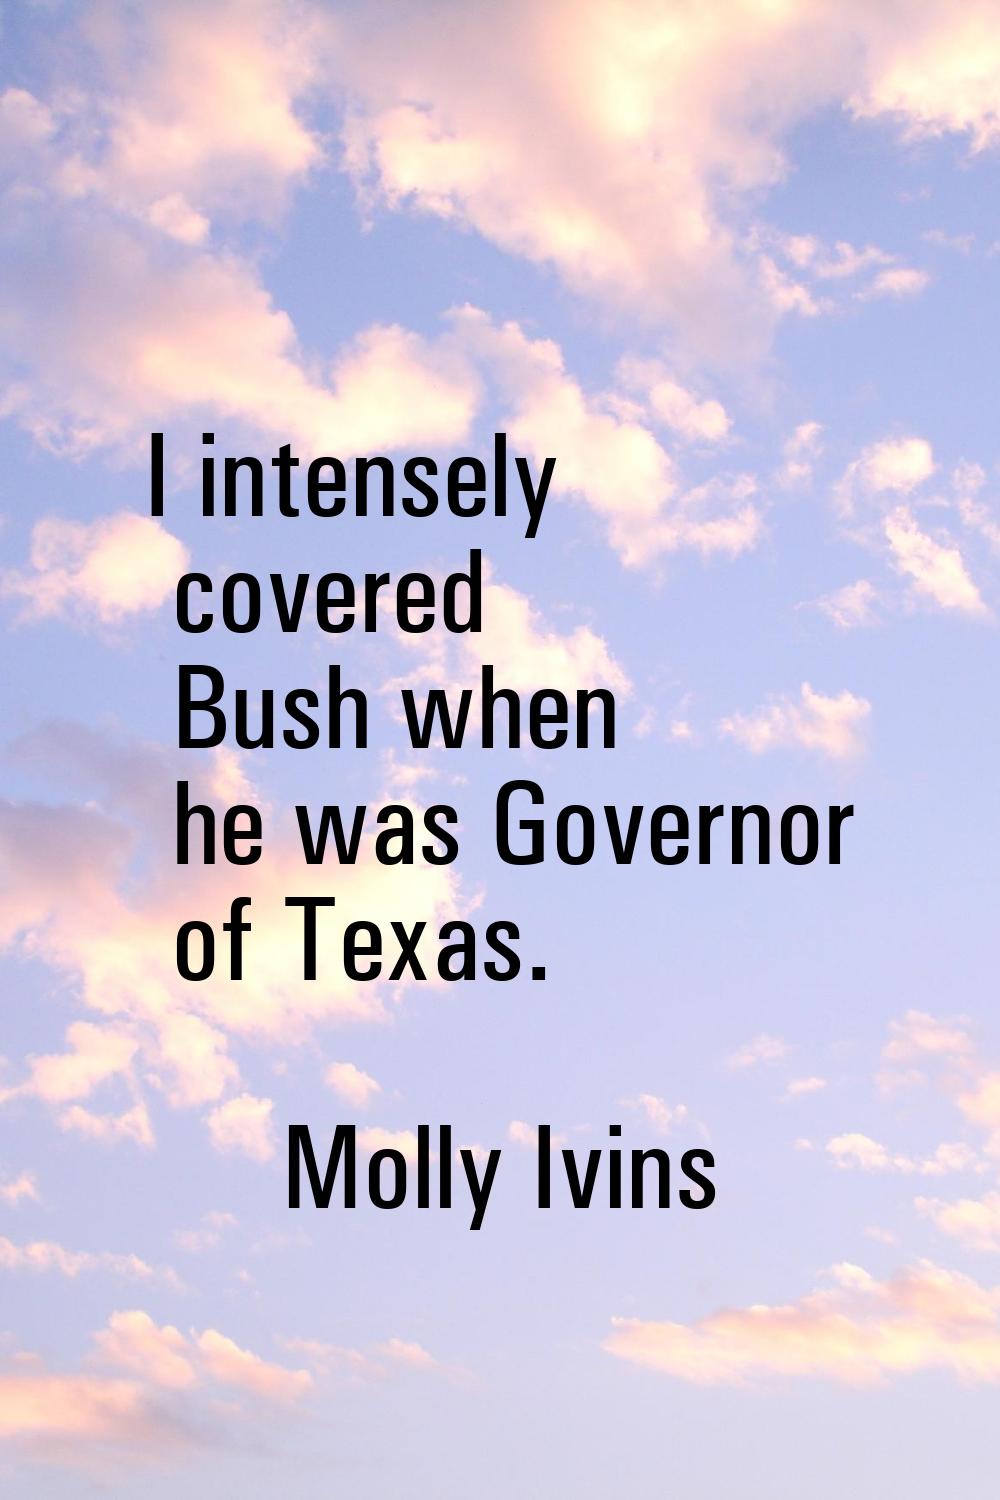 I intensely covered Bush when he was Governor of Texas.